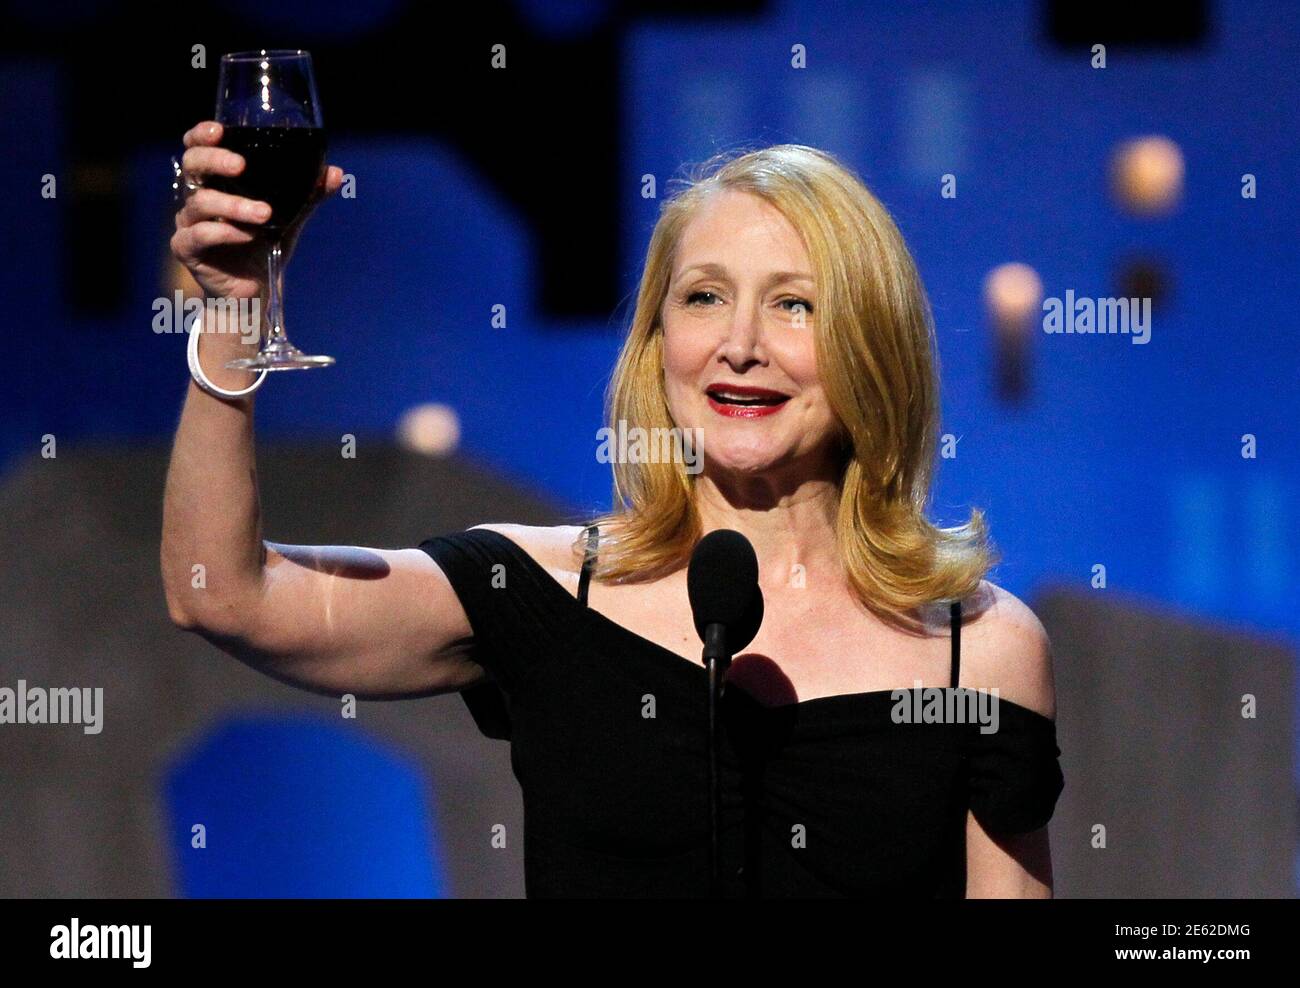 Actress Patricia Clarkson raises a toast to independent filmmaker Bingham Ray, who recently passed away, during a tribute at the 2012 Film Independent Spirit Awards in Santa Monica, California, February 25, 2012. REUTERS/Rick Wilking (UNITED STATES  - Tags: ENTERTAINMENT) Stock Photo